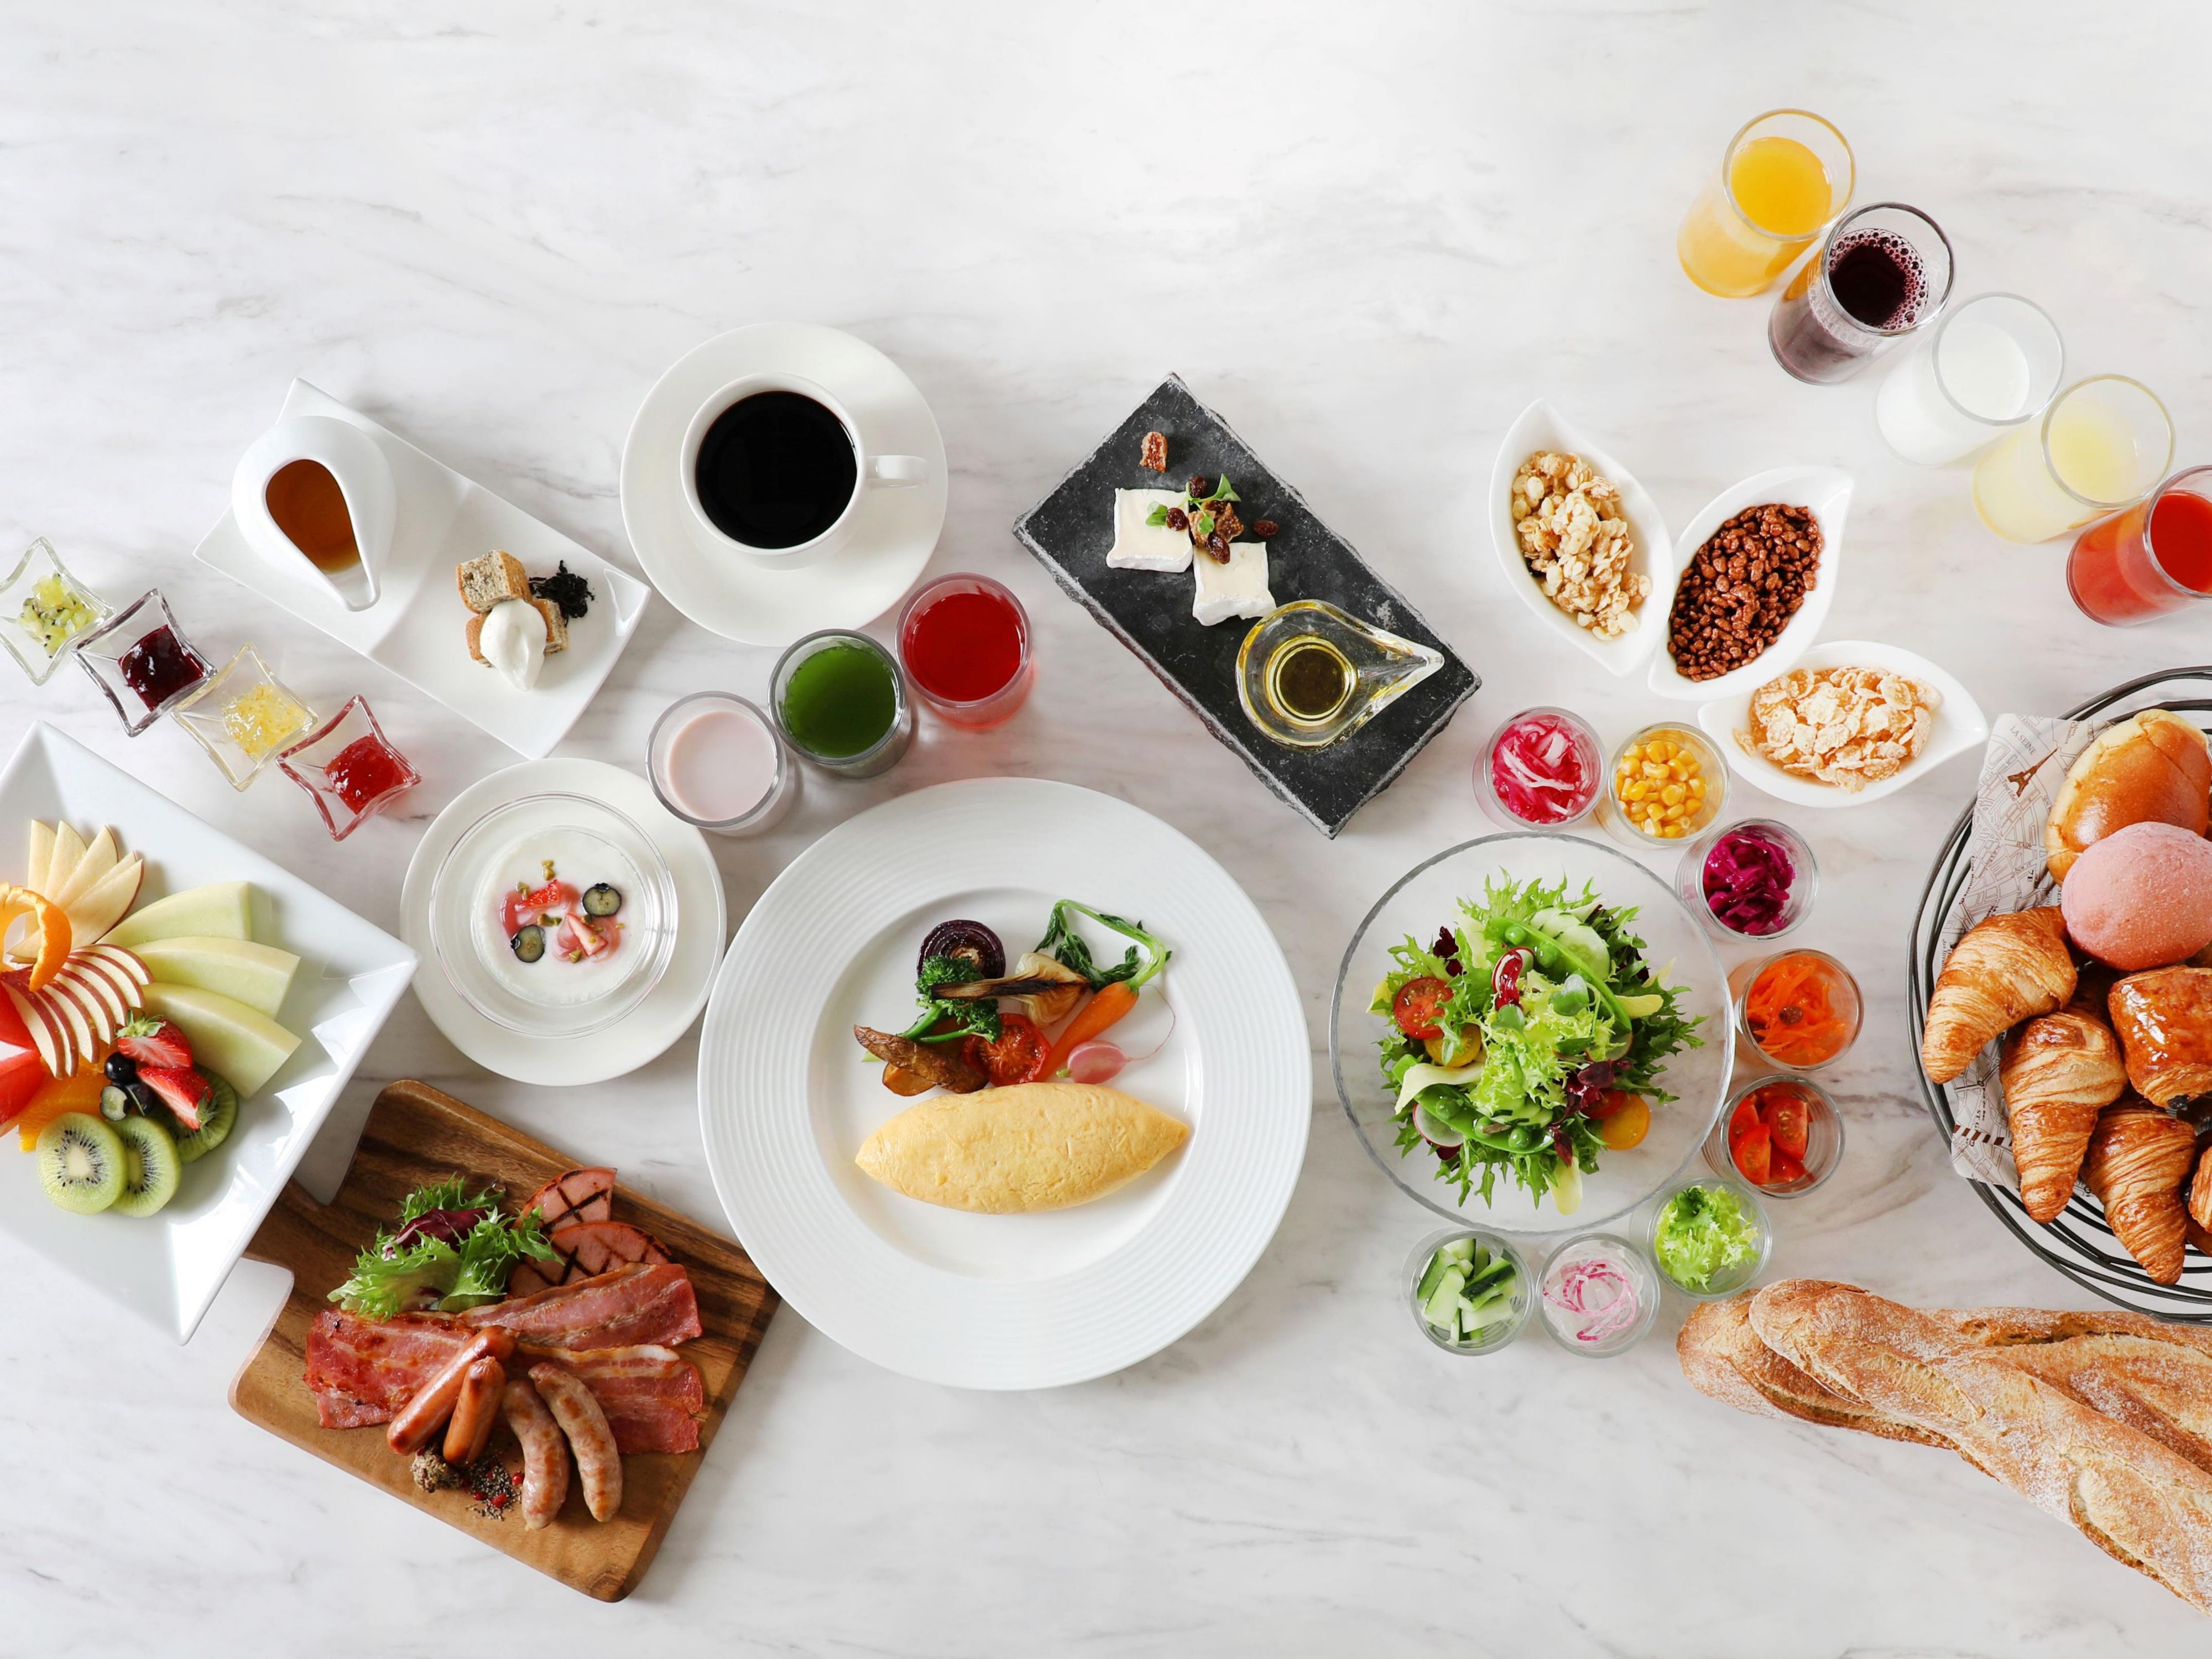 The hotel offers a buffet breakfast. We offer Western style menus with fresh eggs and homemade juice, and Japanese menus with seasonal fish and prefectural rice. You can also enjoy Okayama's local special dish and fresh vegetables and fruits created by our chefs so you can have a great start to your new day!